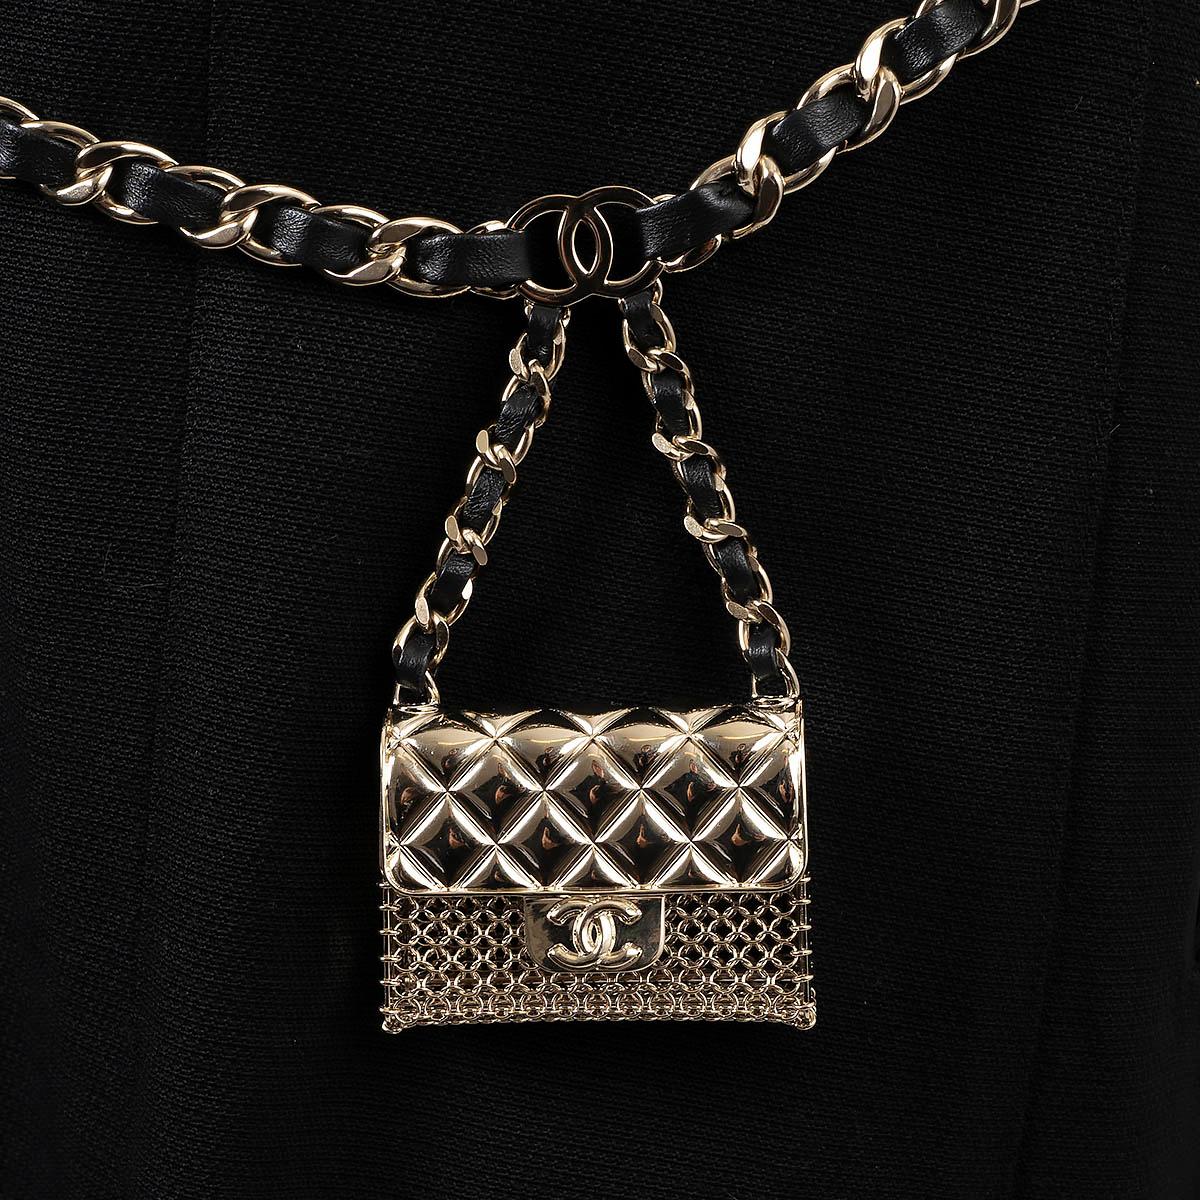 CHANEL black leather & metal 2021 21S MICRO BAG CHARM CHAIN Belt 80 For Sale 2